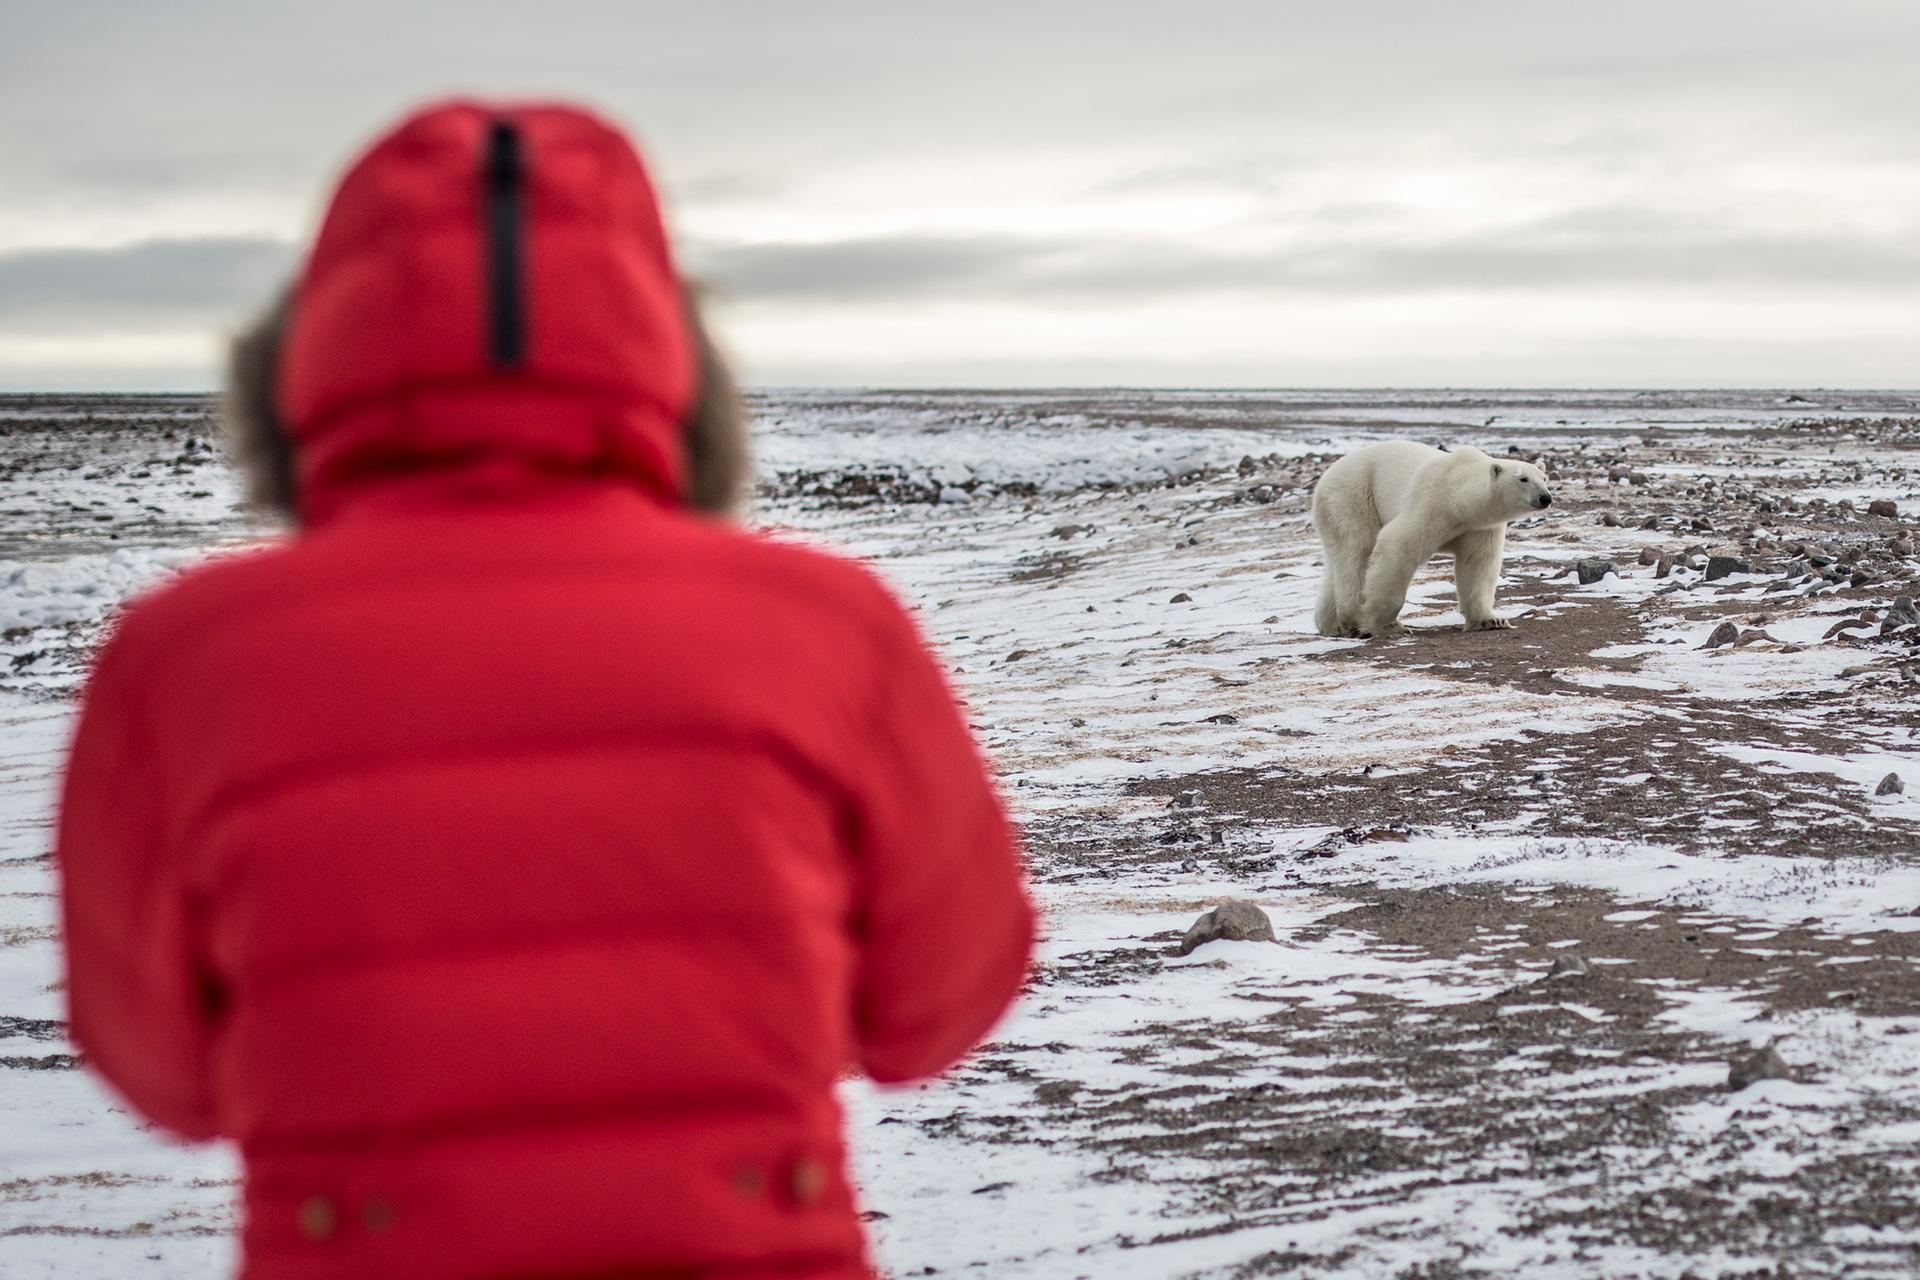 Safety for both guests and animals is the top priority on polar bear safaris. 